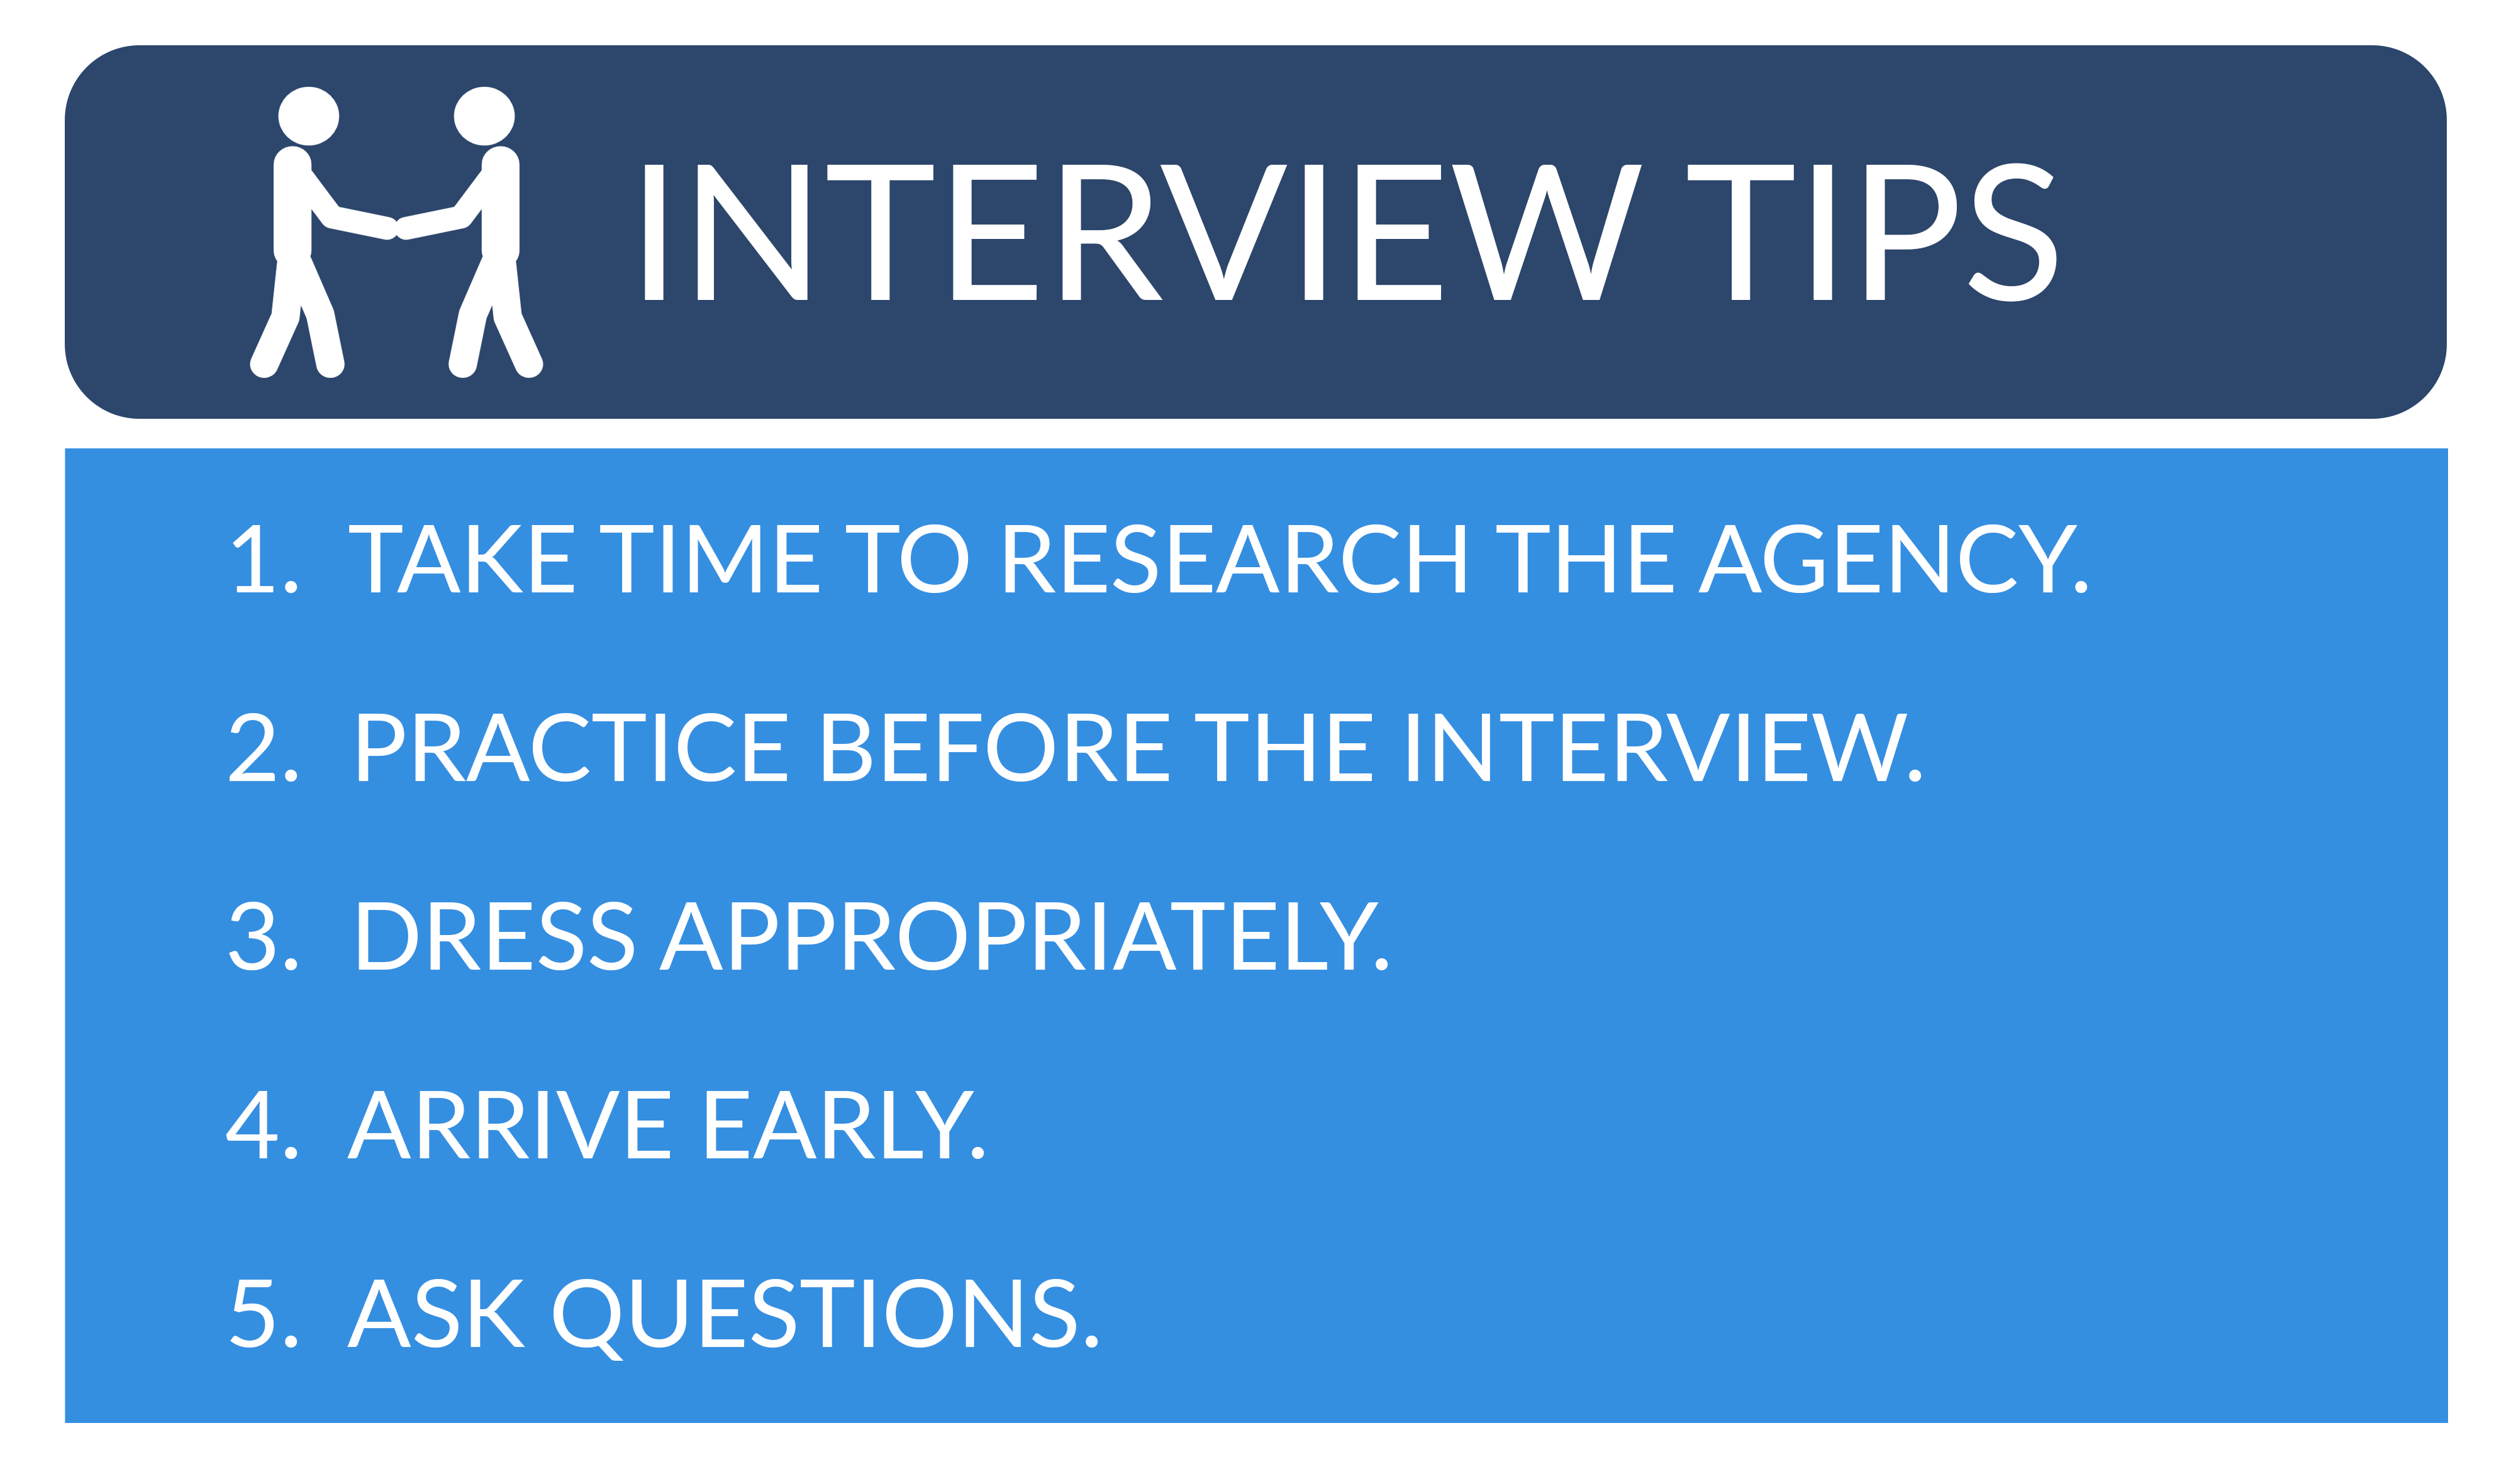 Interview tips 1. Tame time to research the Agency, 2. Practice Before the Interview, 3. Dress Appropriately, 4. Arrive Early, 5. Ask Questions.